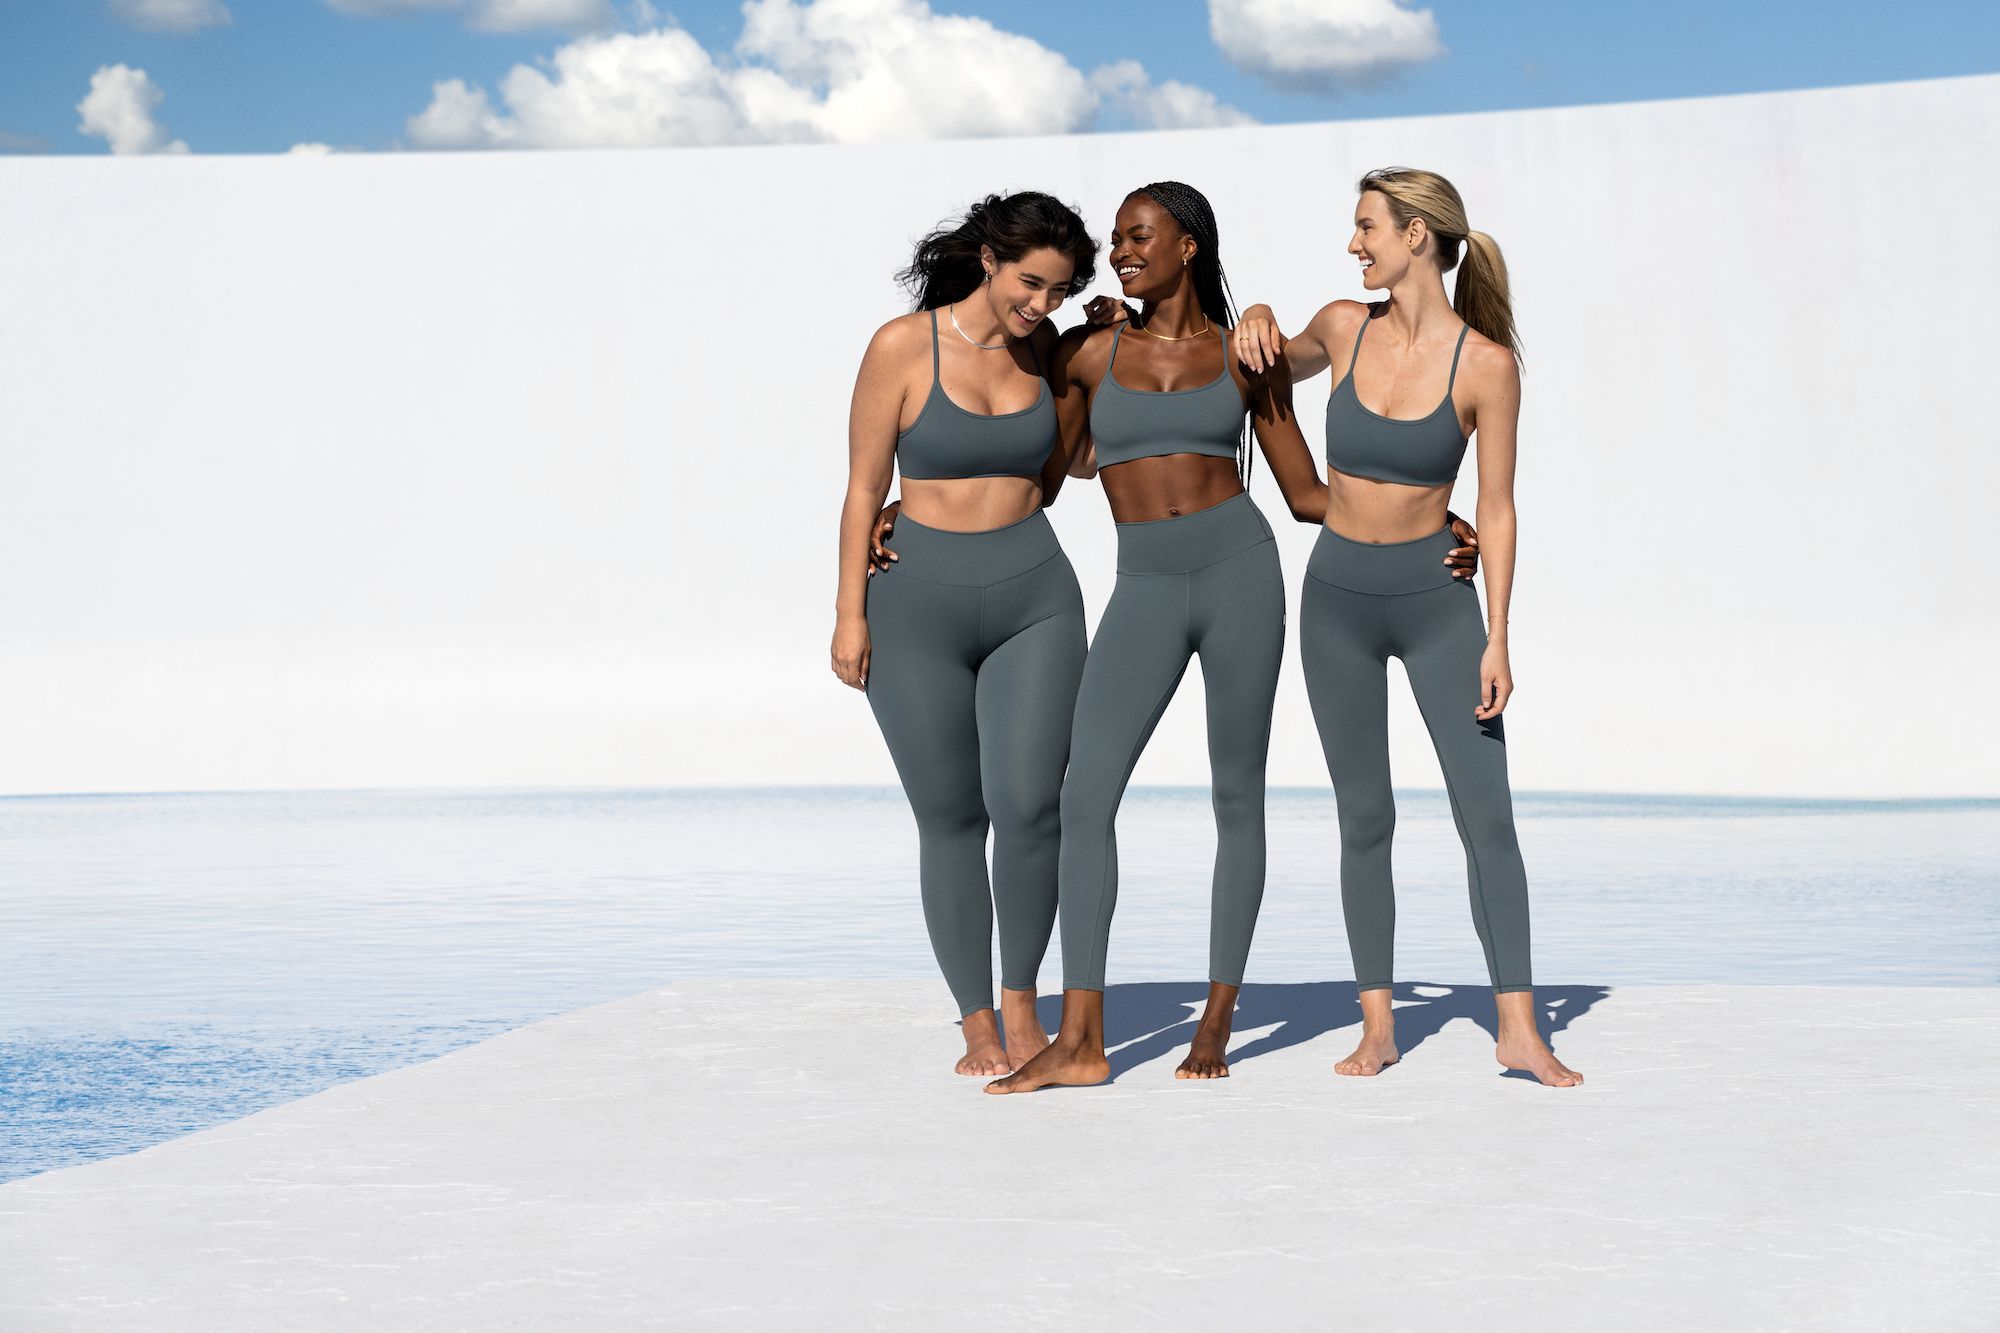 Carhartt launches leggings for women - Electrical Contracting News (ECN)